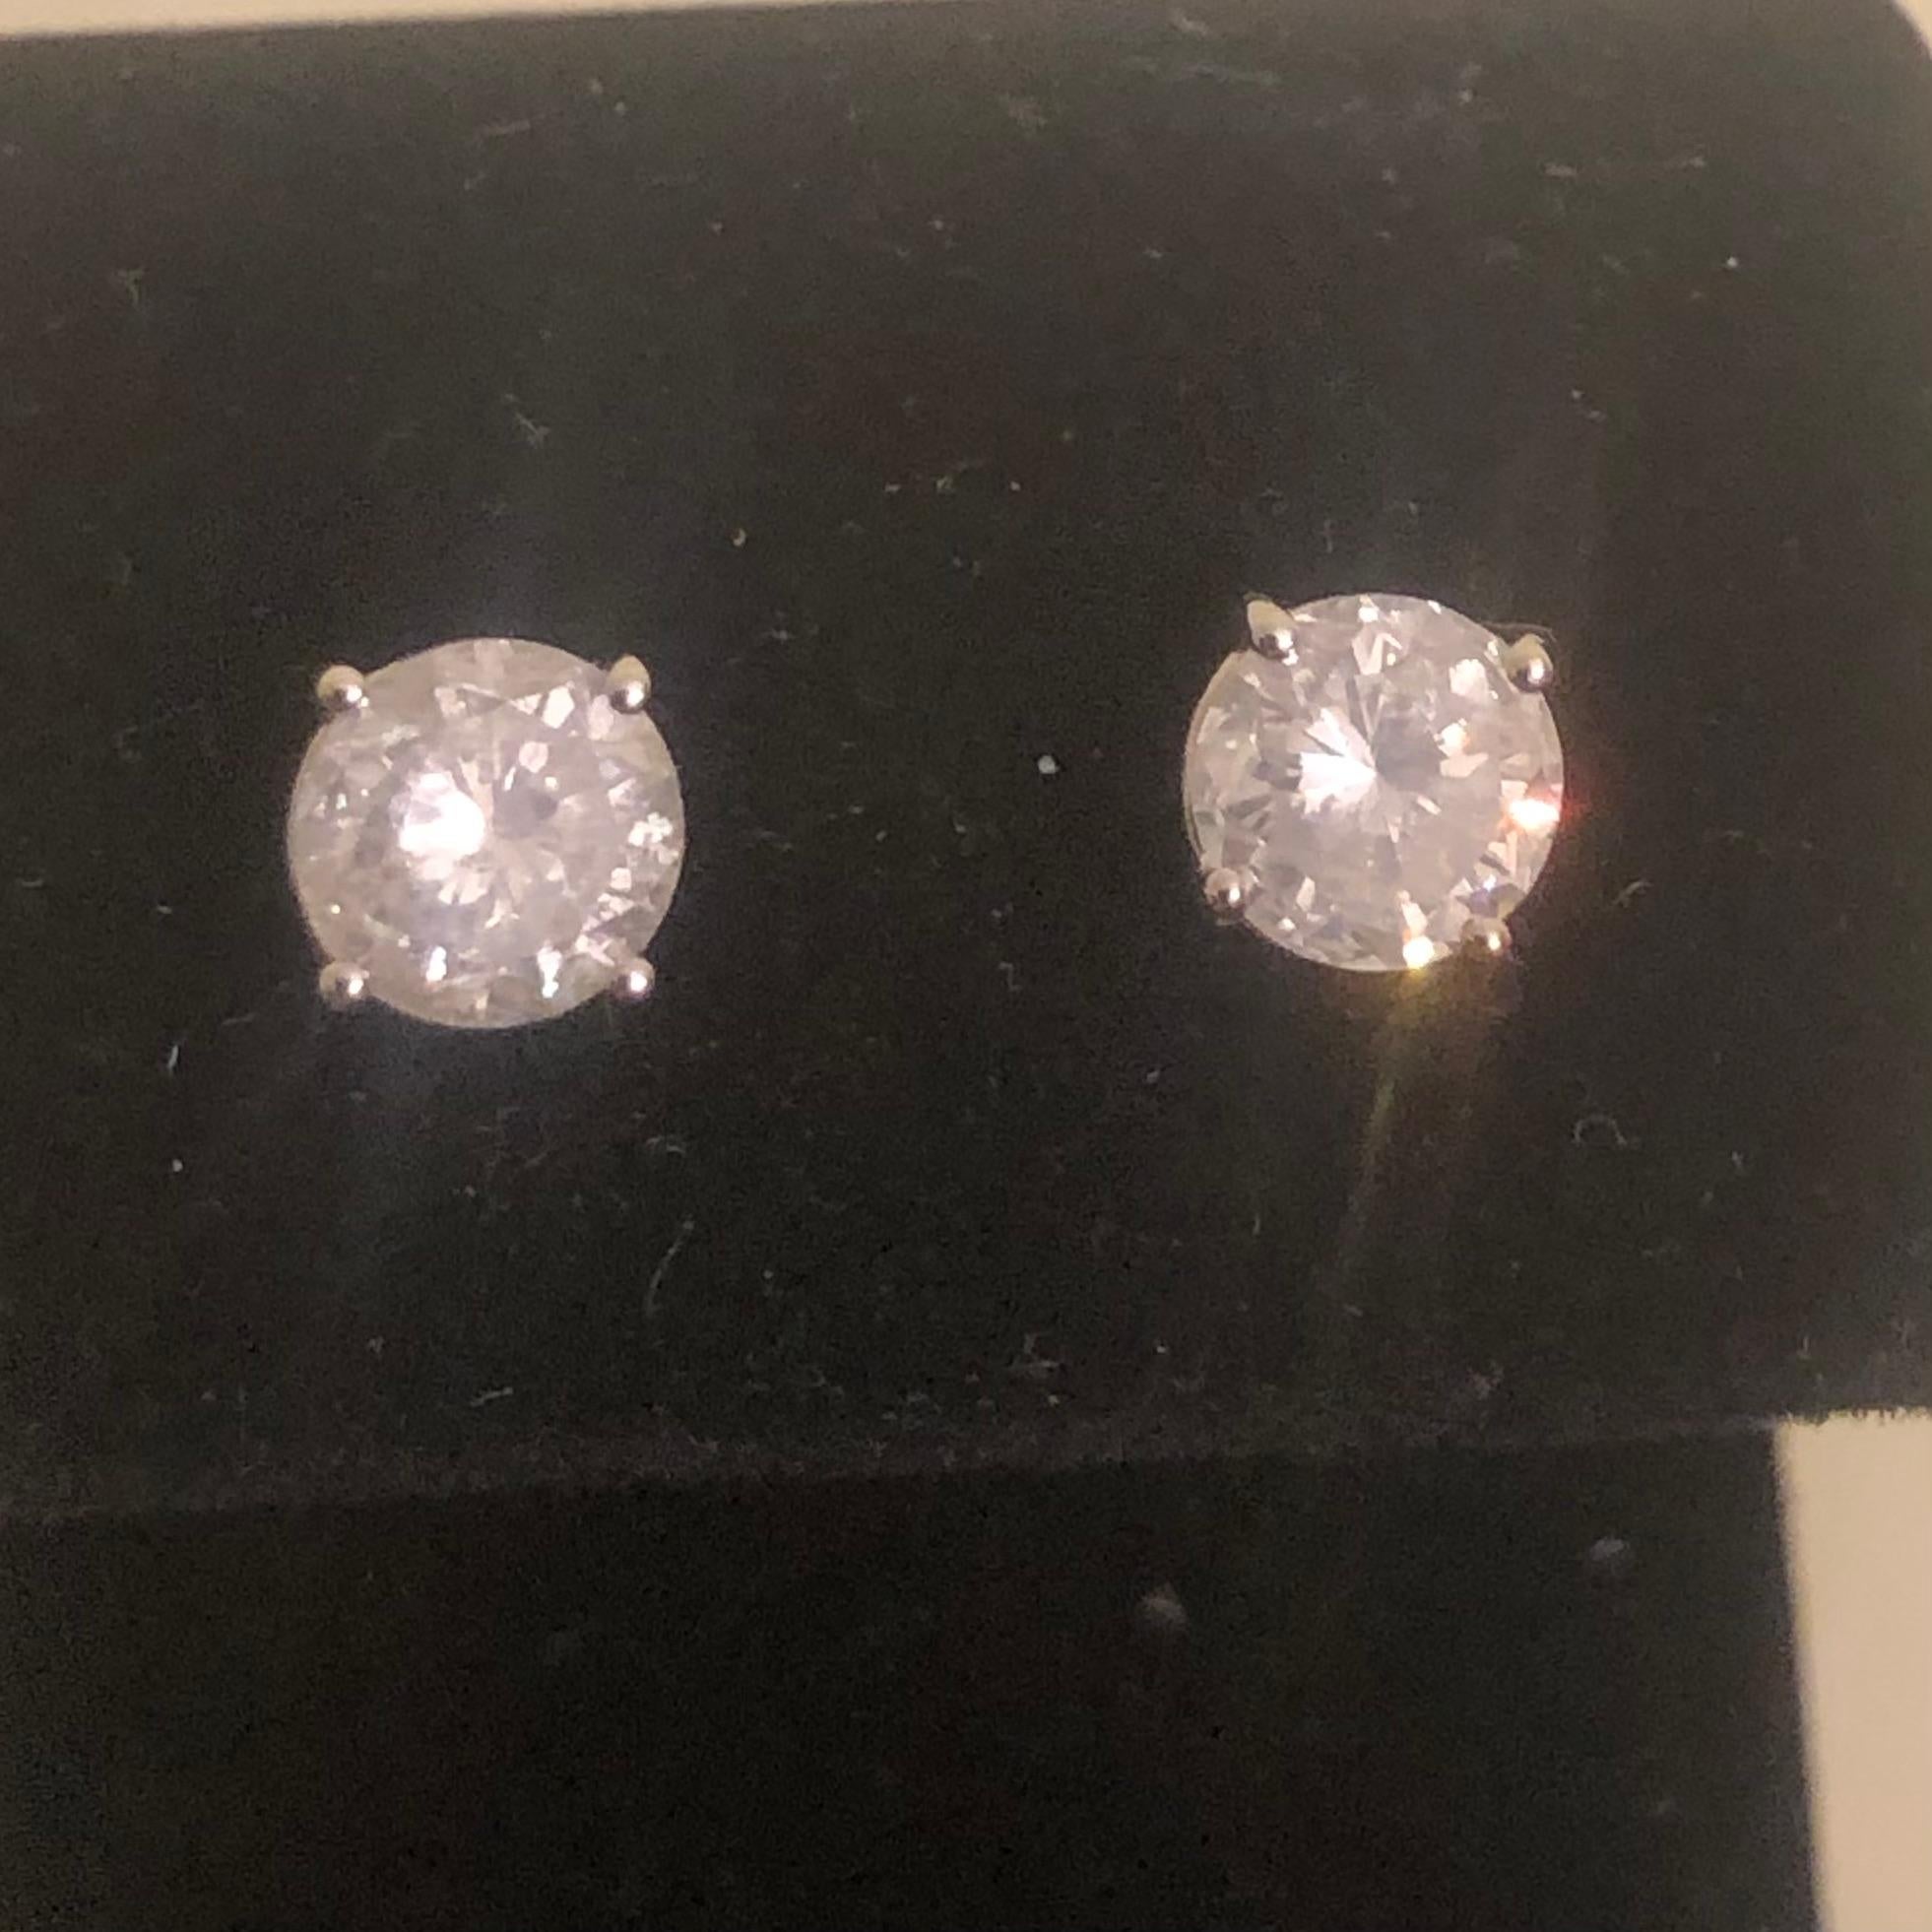 Stunning 2 Carat Brilliant Round Solitaire Diamond Stud Earrings in 14K White Gold. These natural diamond studs are certified with an appraisal report value of $8,850.00.

A large center 1 carat plus solitaire diamond (size of an engagement ring) is